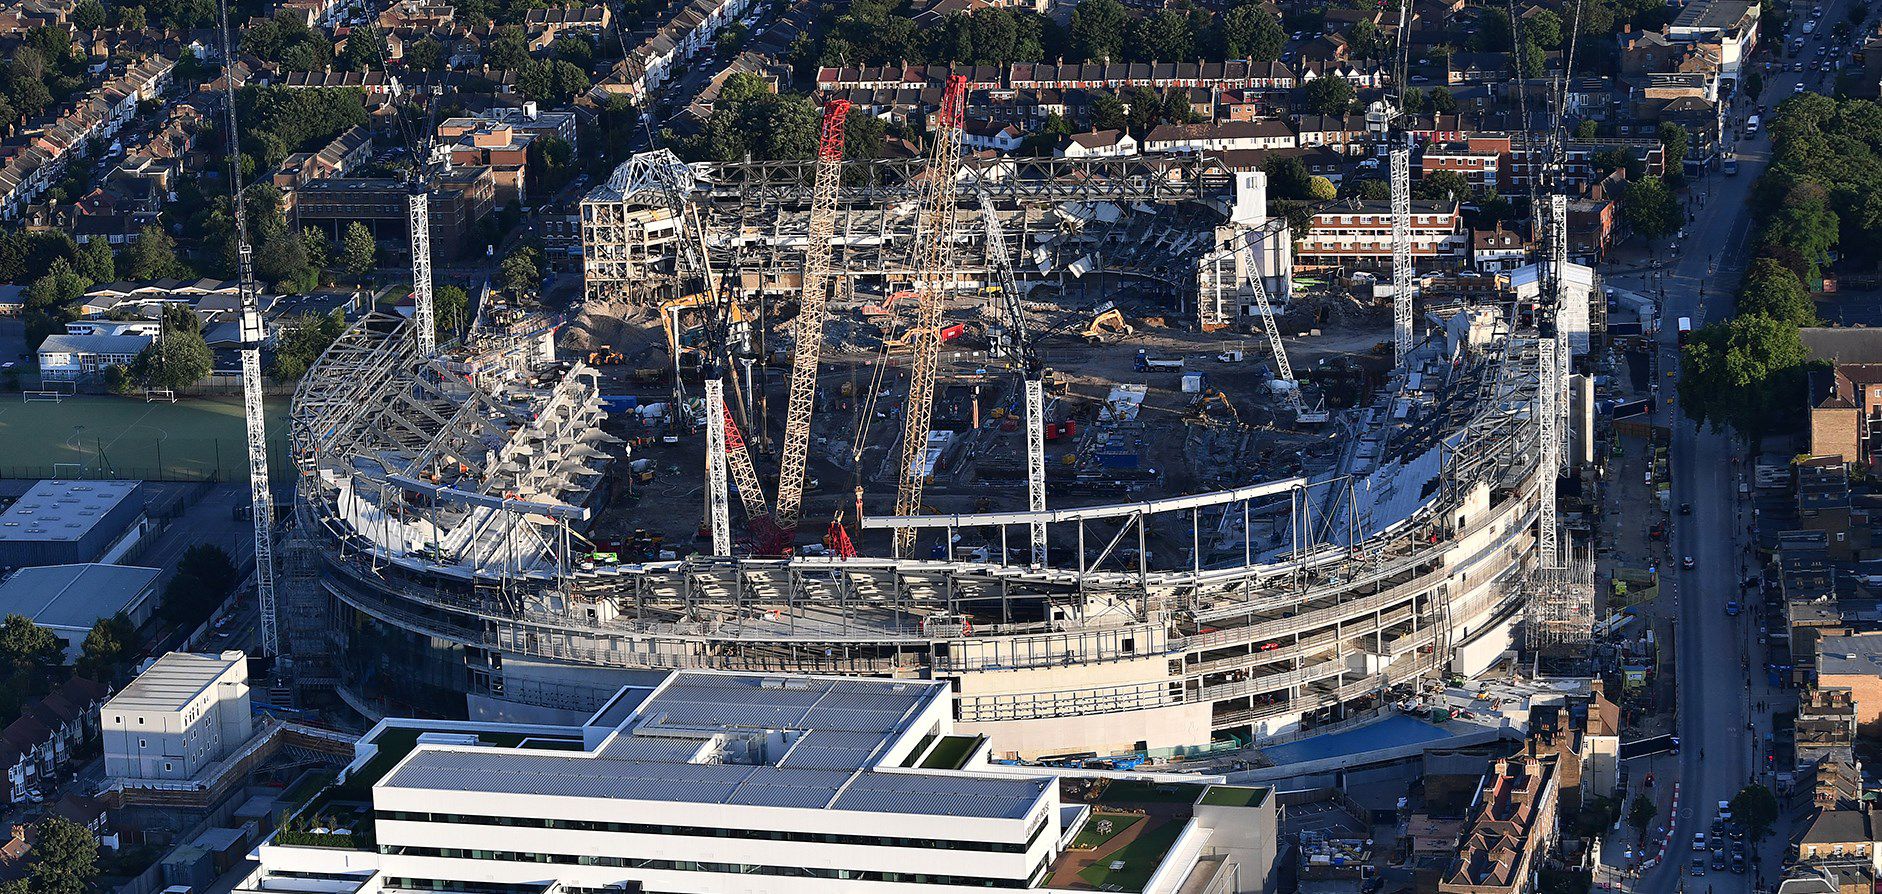 Full house: Comparing the world’s largest sporting venues